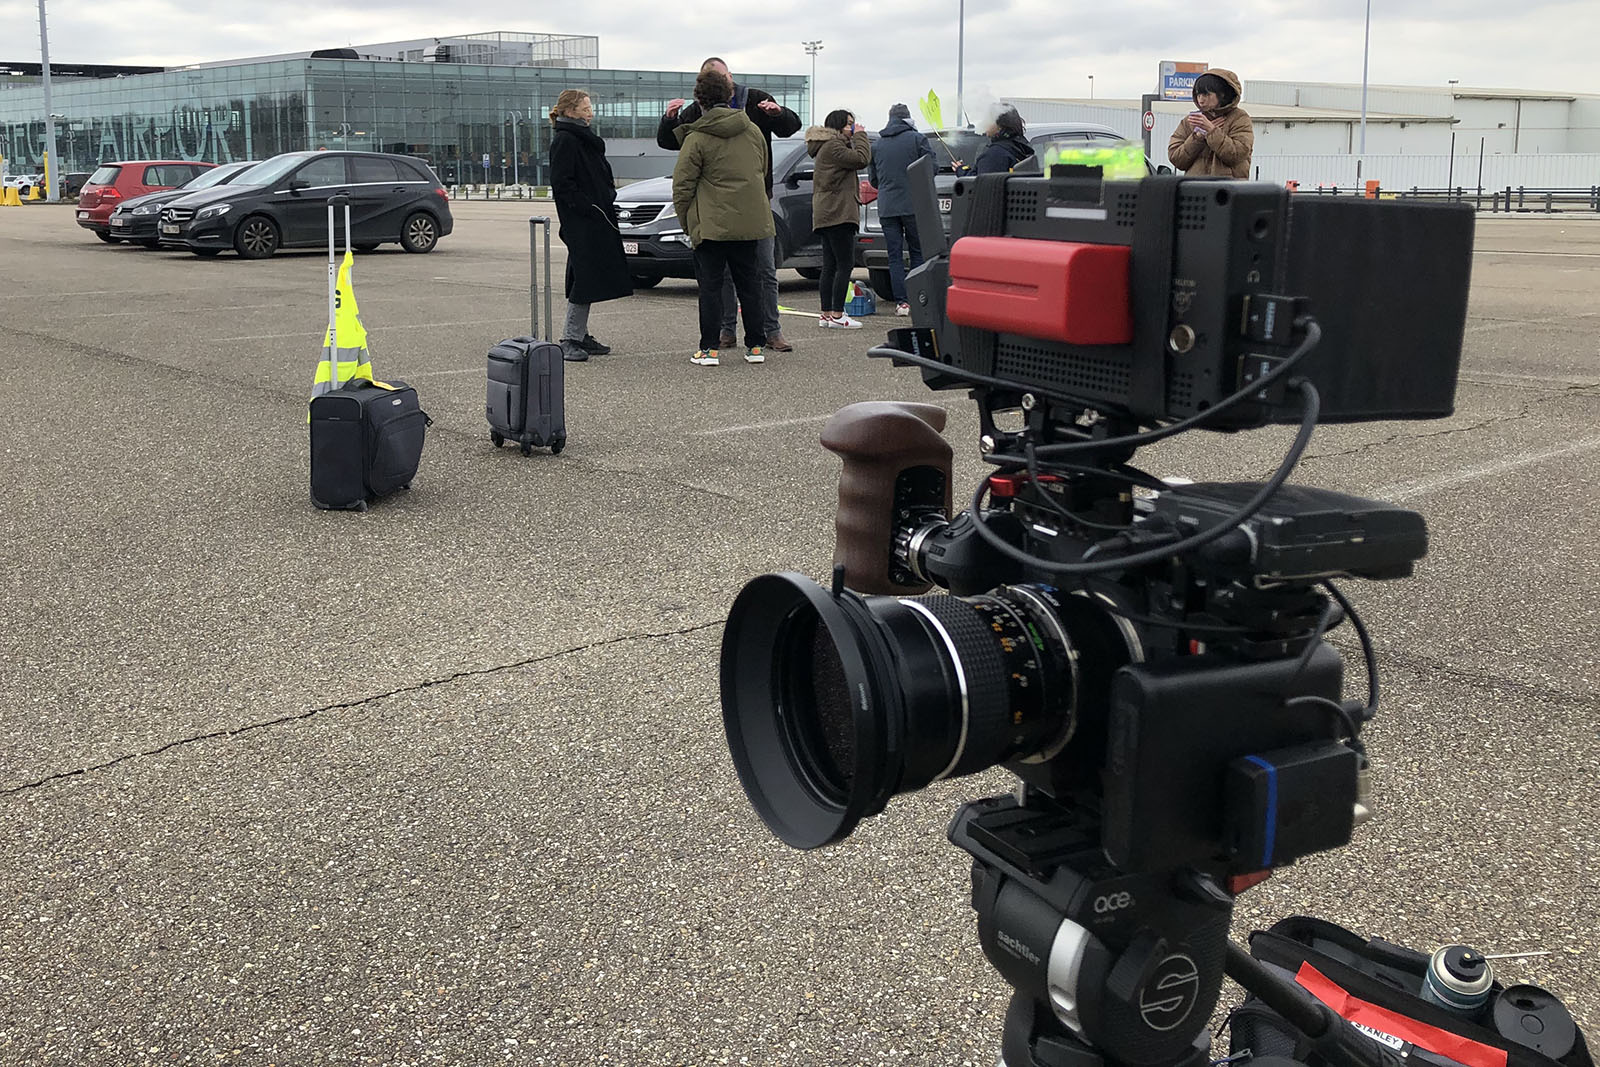 S1H configuration on a tripod on the airport tarmac